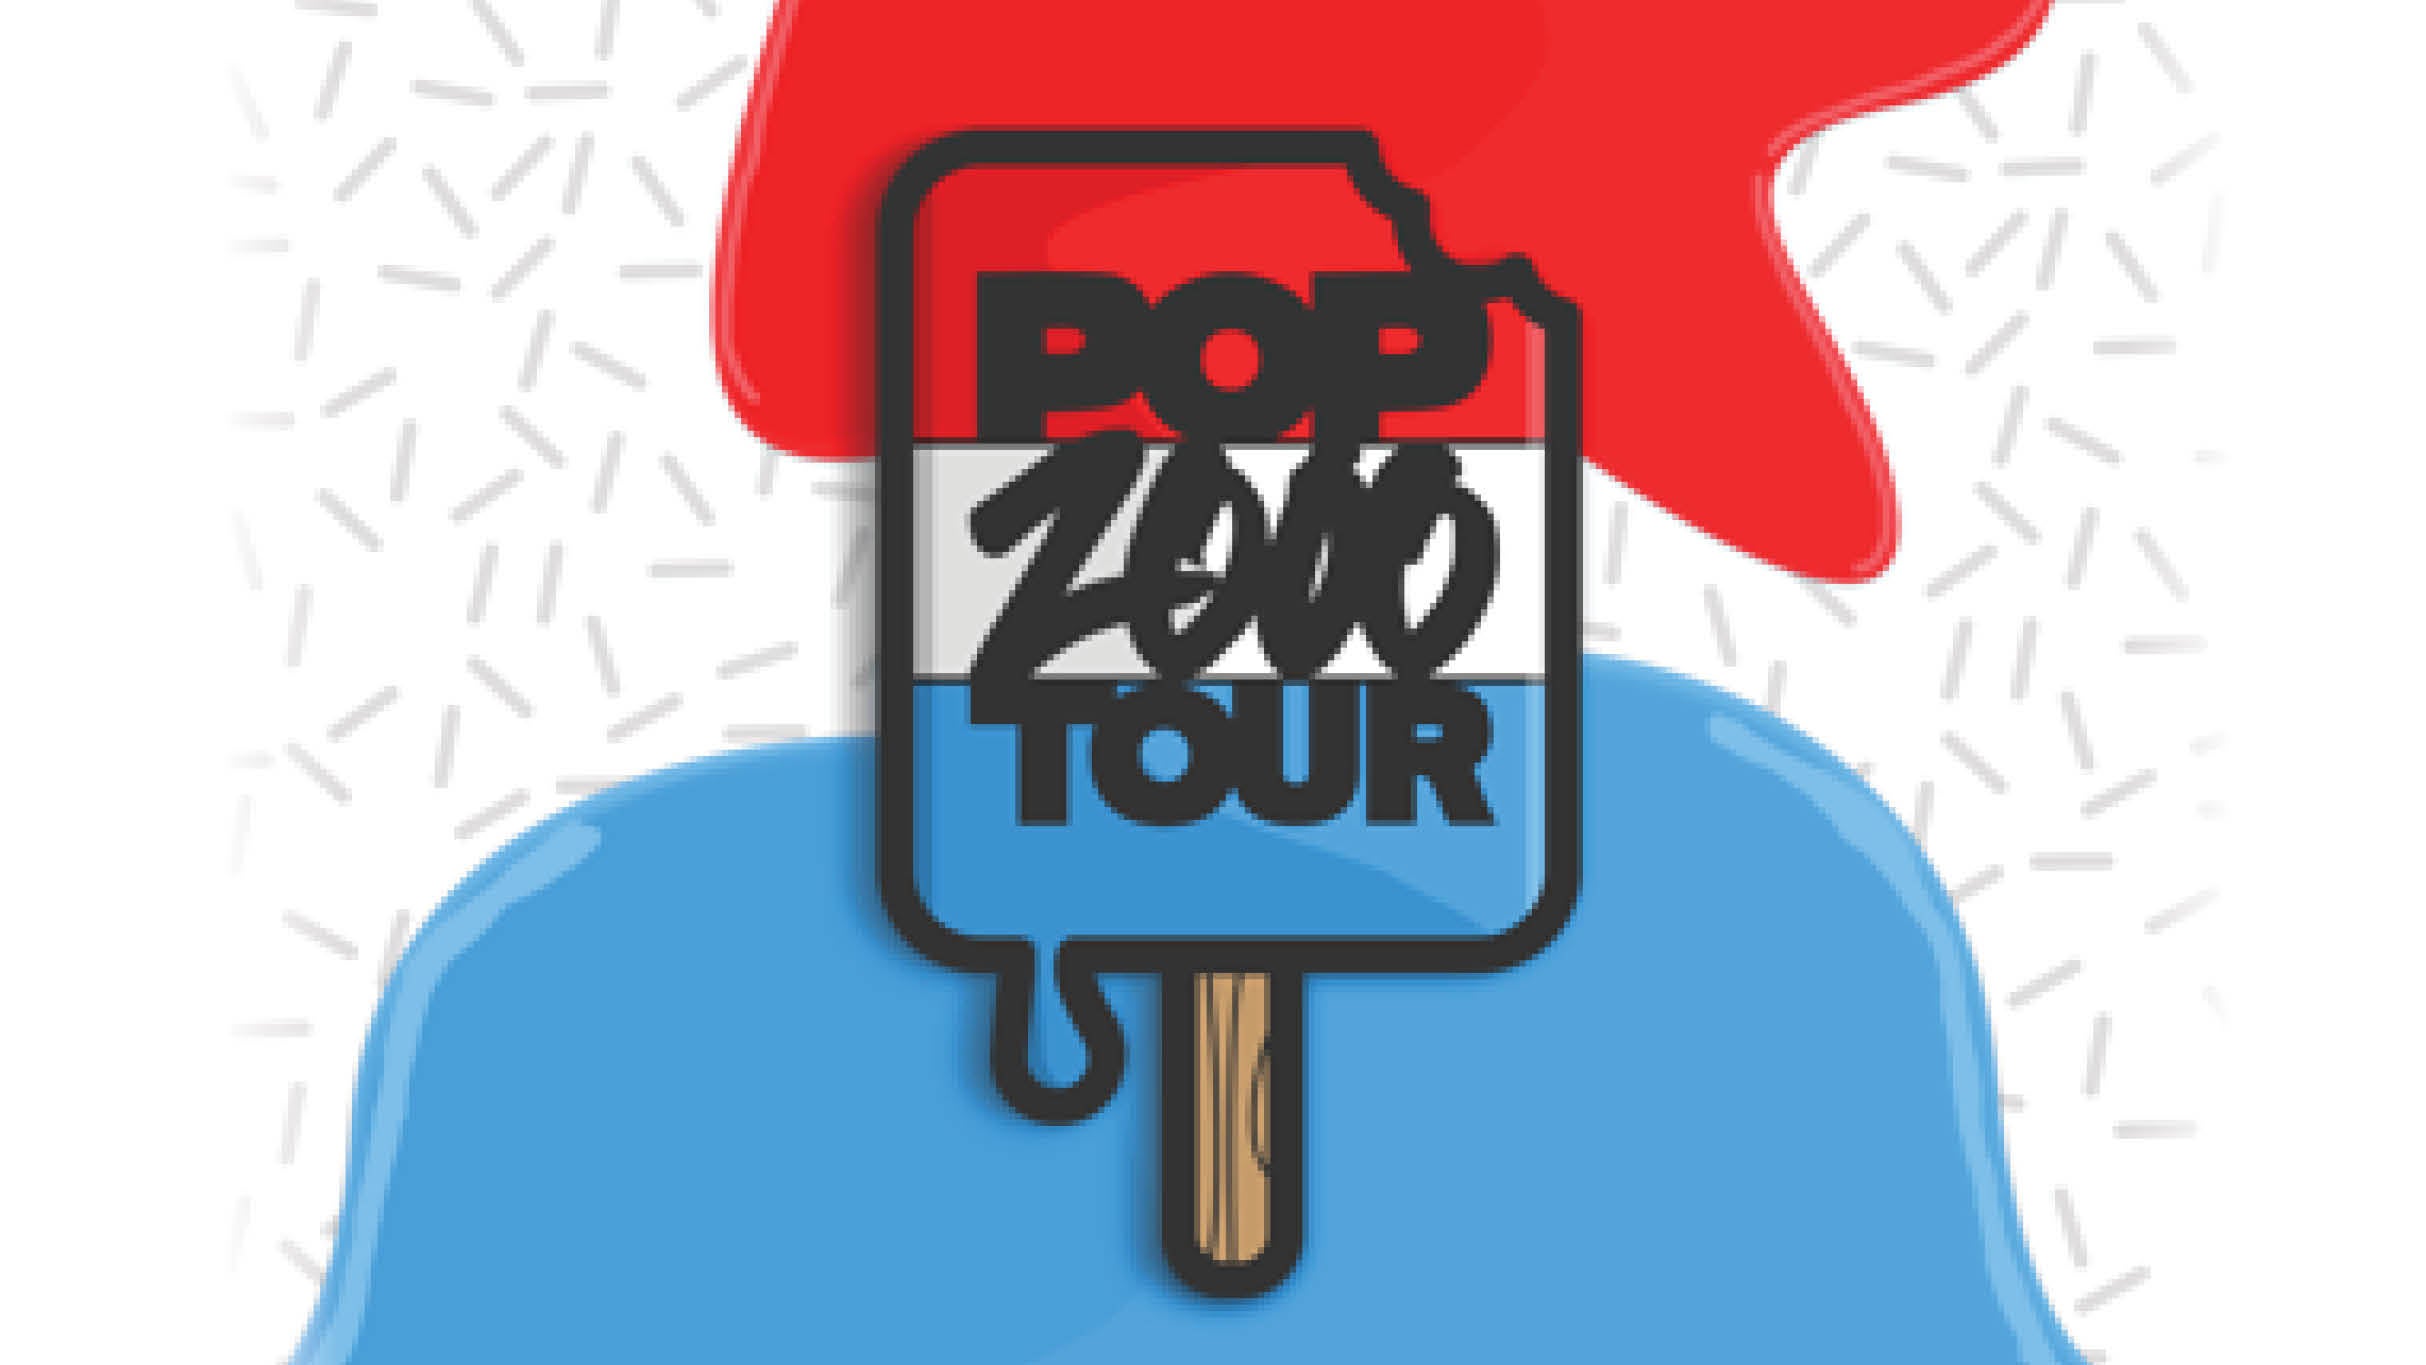 POP2000 Tour with Chris Kirkpatrick of *NSYNC, O-Town and LFO pre-sale passcode